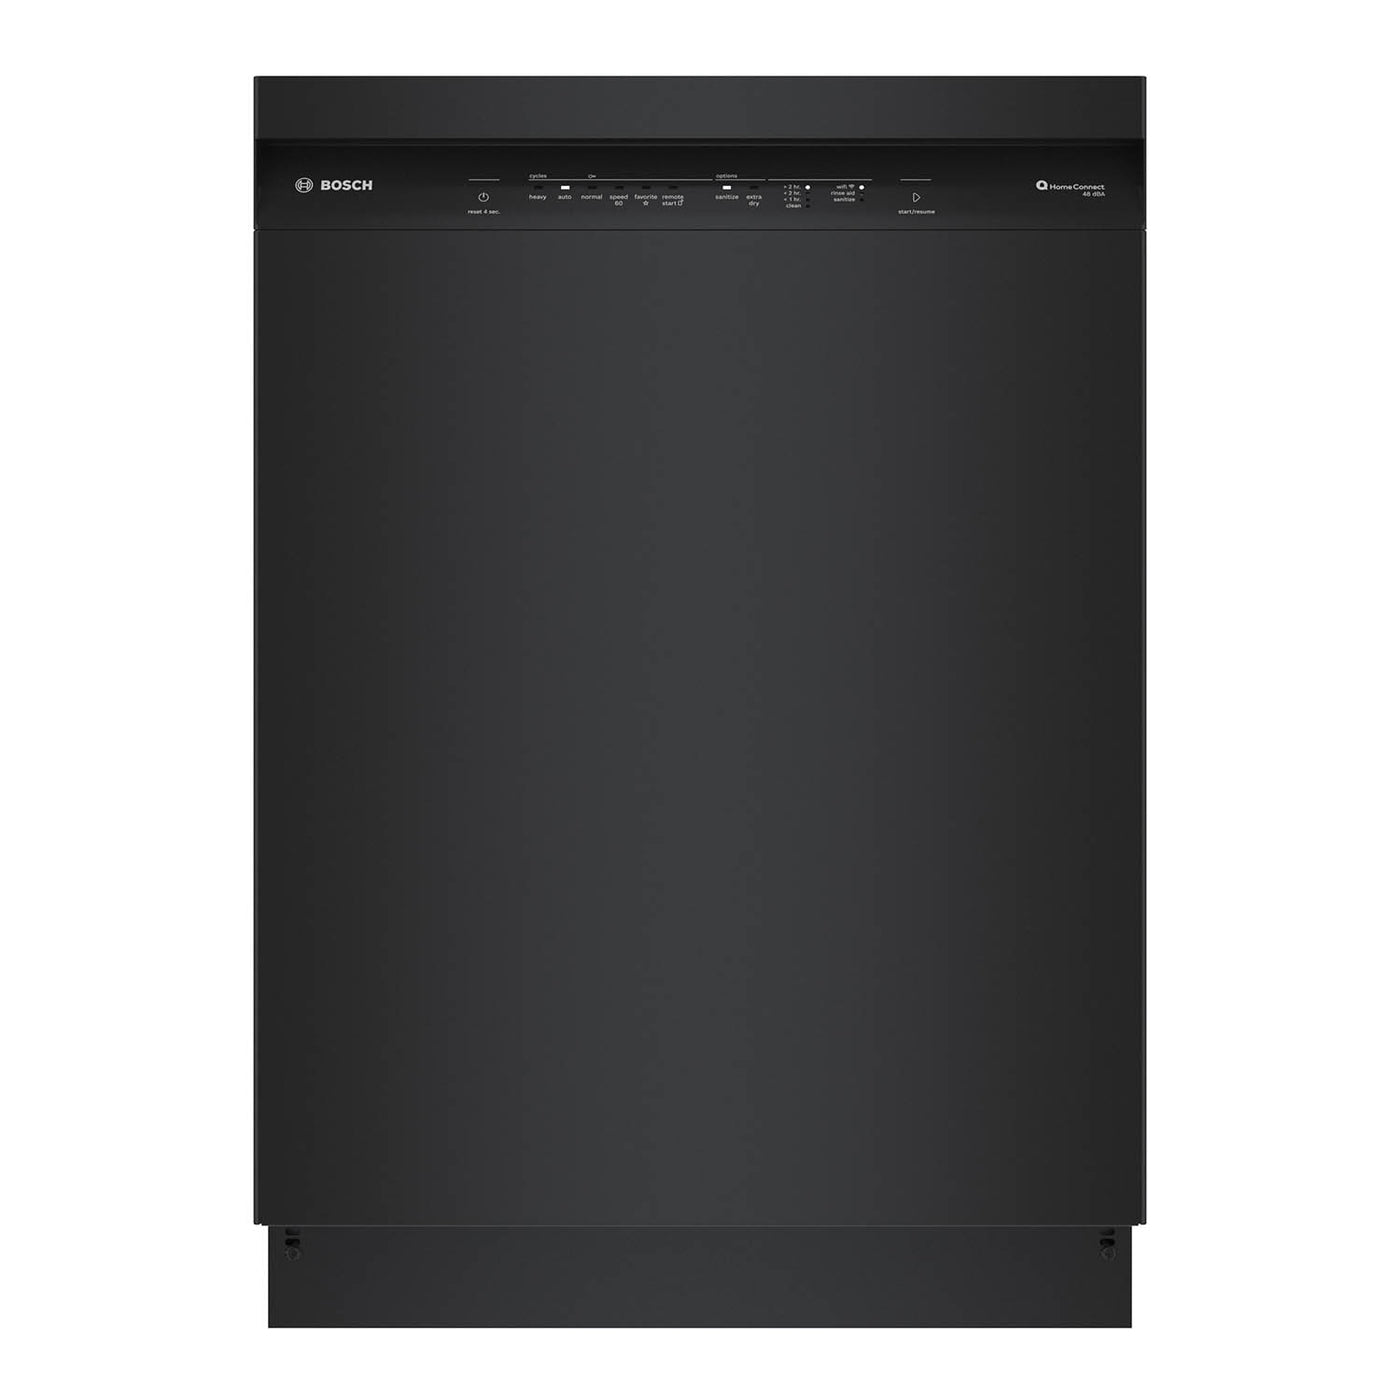 Bosch Black 24" Smart Dishwasher with Home Connect -SHE4AEM6N